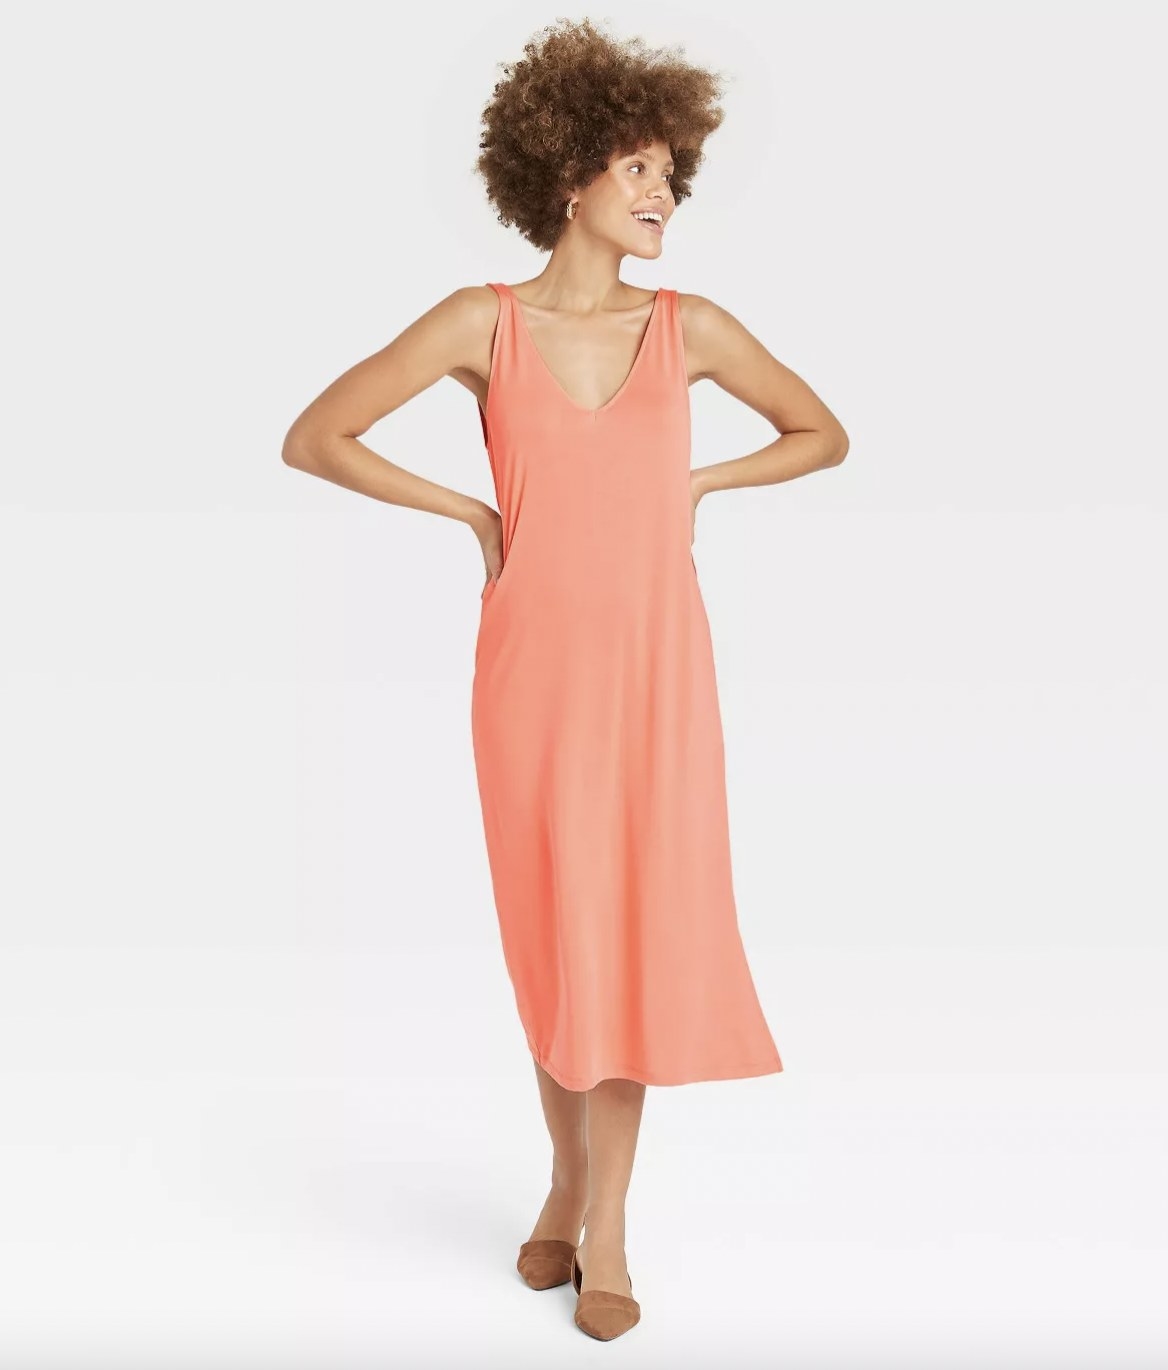 31 Dresses Under $50 From Target That’ll Keep You Cool